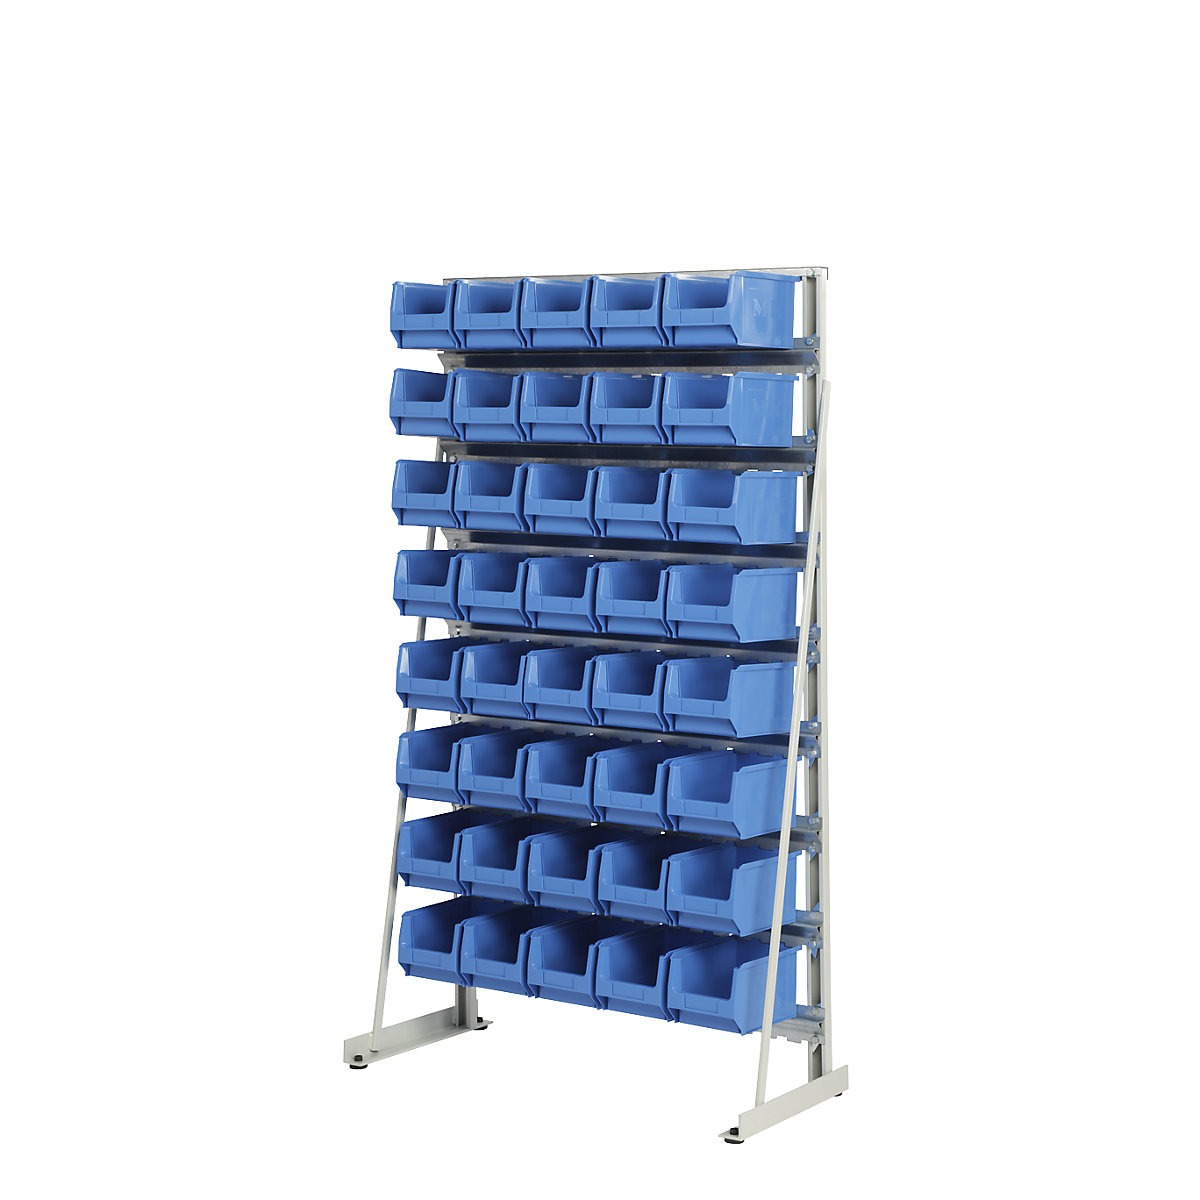 Free-standing small parts shelf unit with open fronted storage bins – eurokraft pro